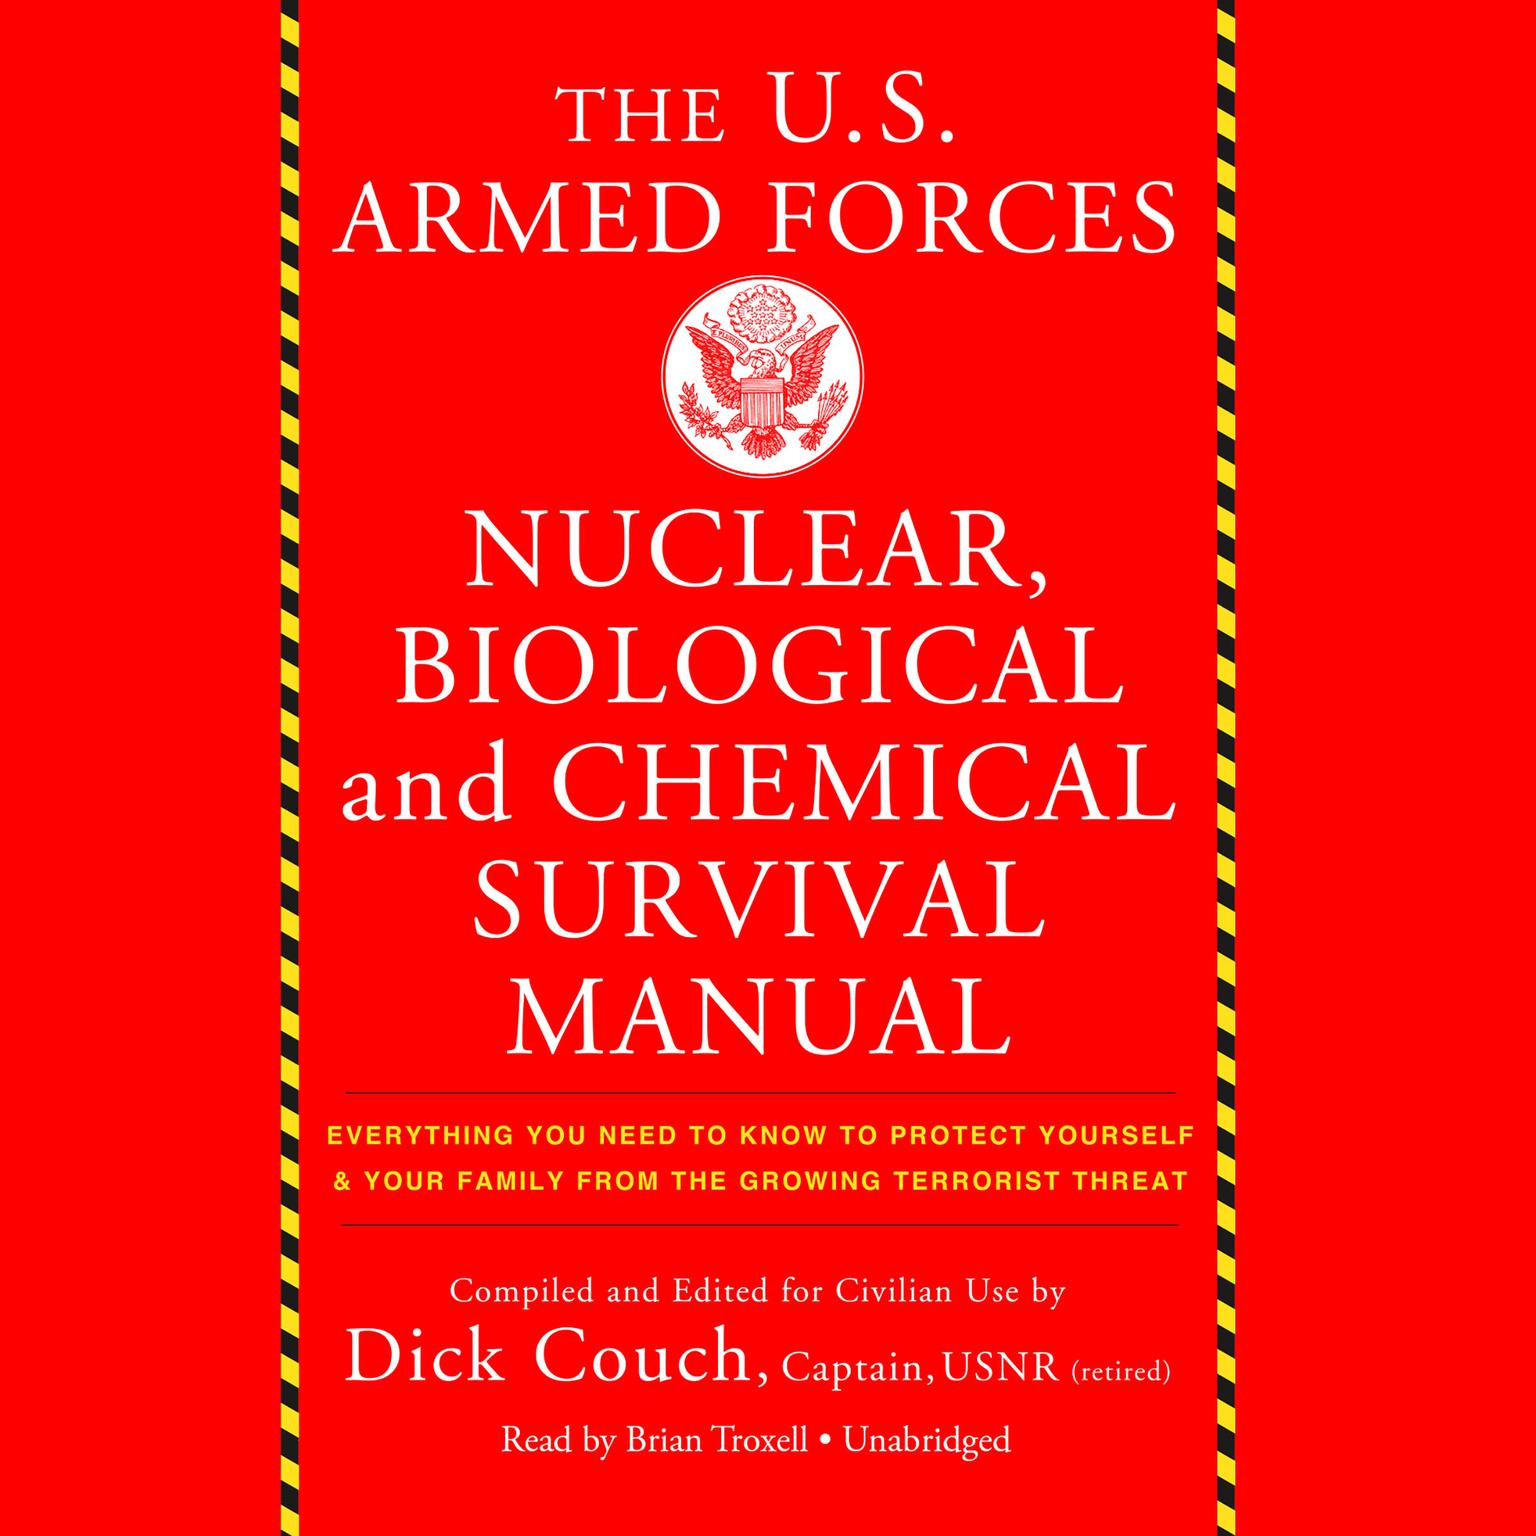 The US Armed Forces Nuclear, Biological, and Chemical Survival Manual: Everything You Need to Know to Protect Yourself and Your Family from the Growing Terrorist Threat Audiobook, by Dick Couch